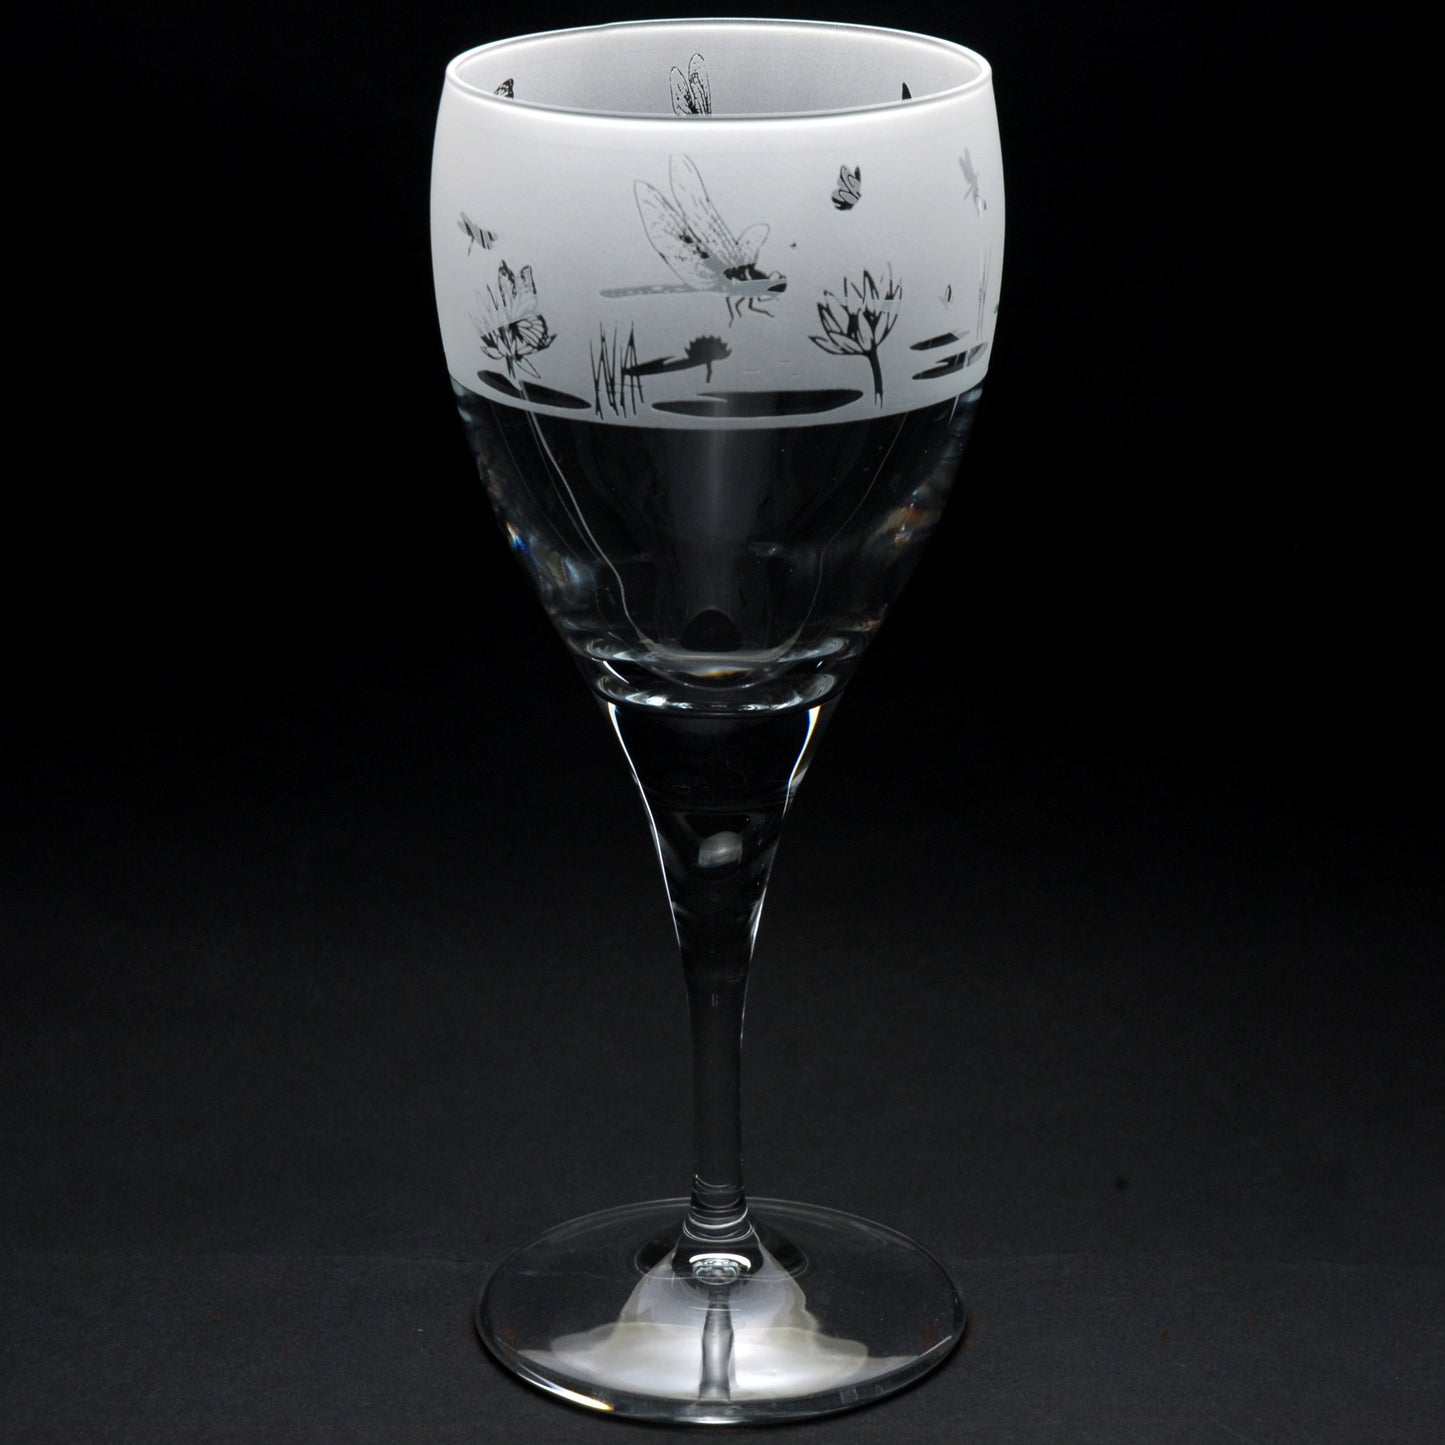 Butterfly and Dragonfly Crystal Wine Glass - Hand Etched/Engraved Gift